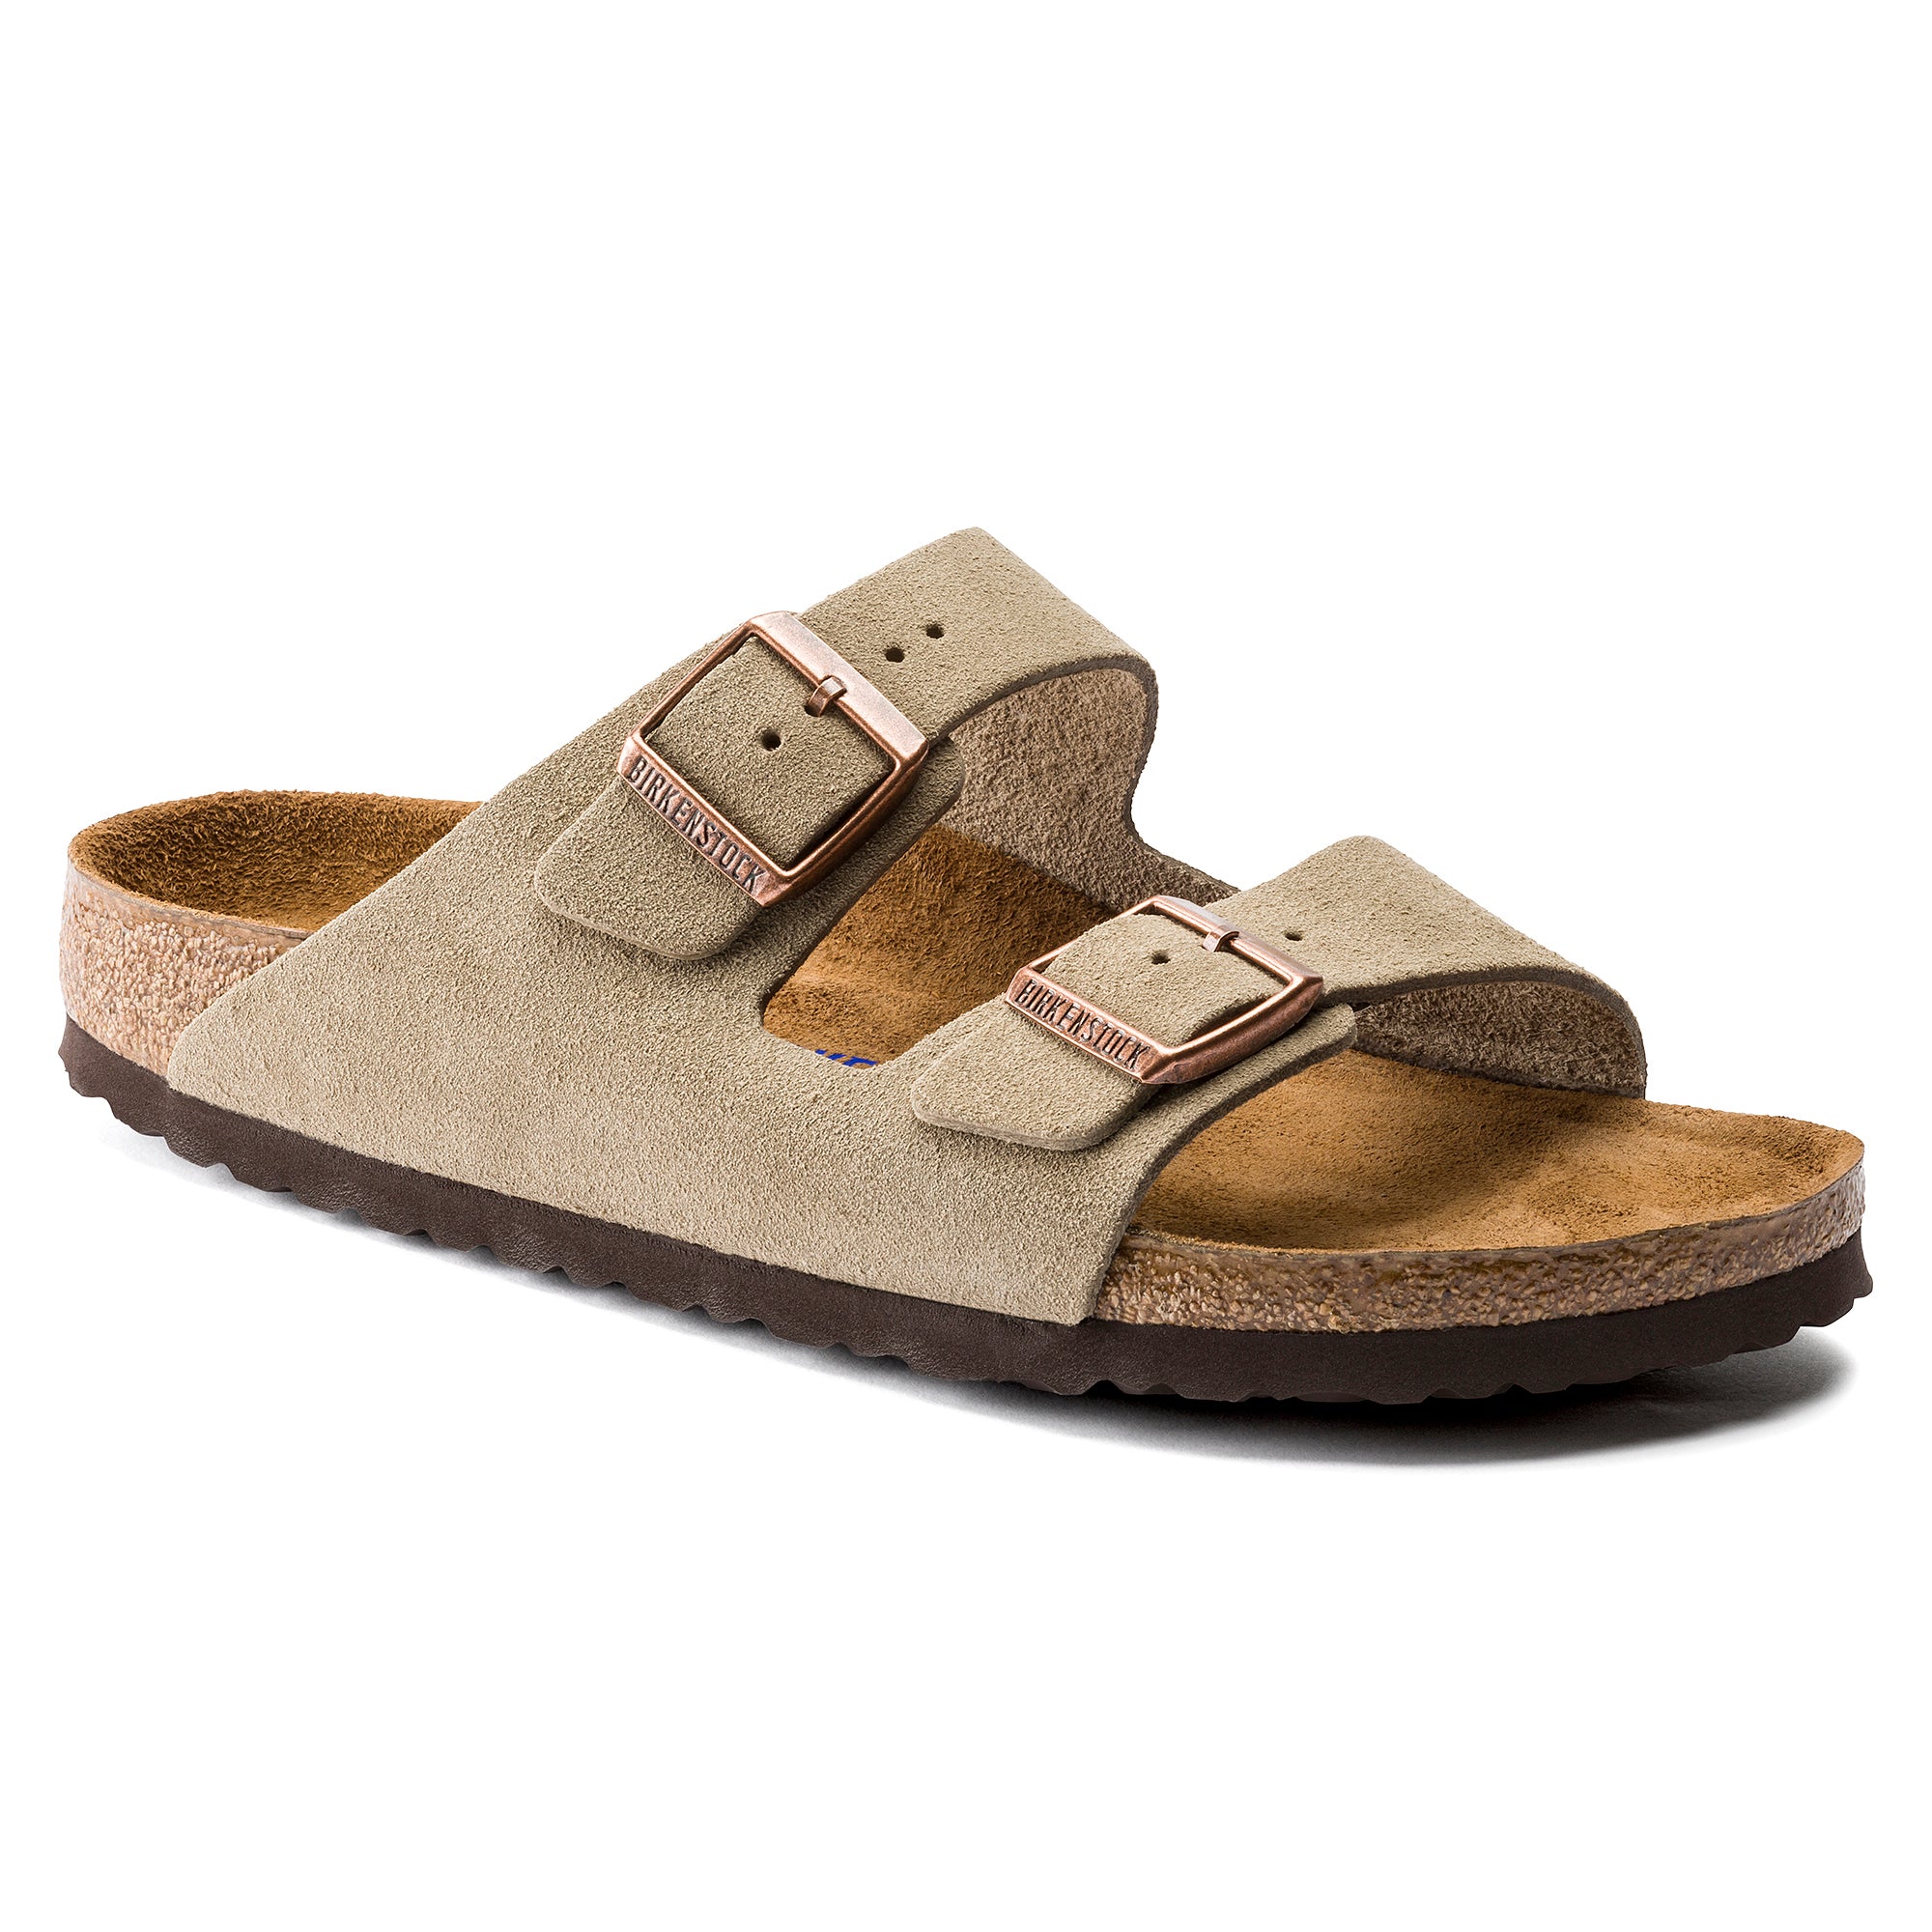 Arizona Soft Footbed - Suede Leather-1